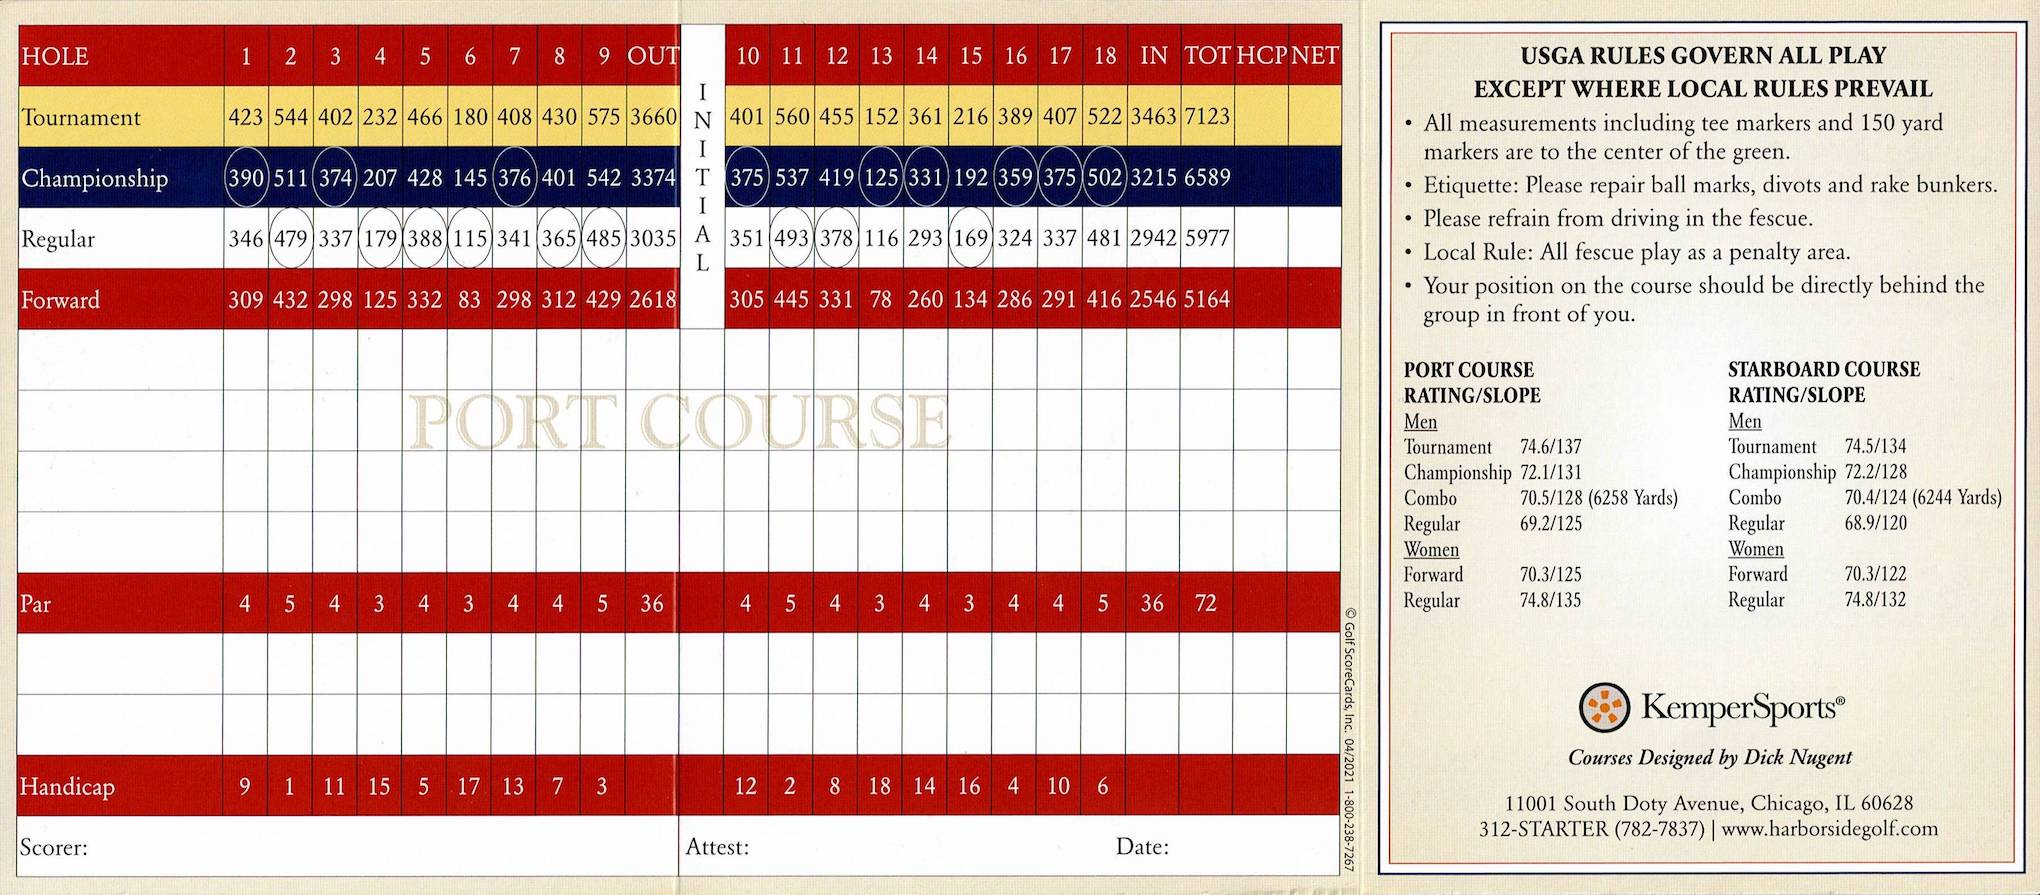 Scan of the scorecard from Harborside International - Starboard Course in Chicago, Illinois. 